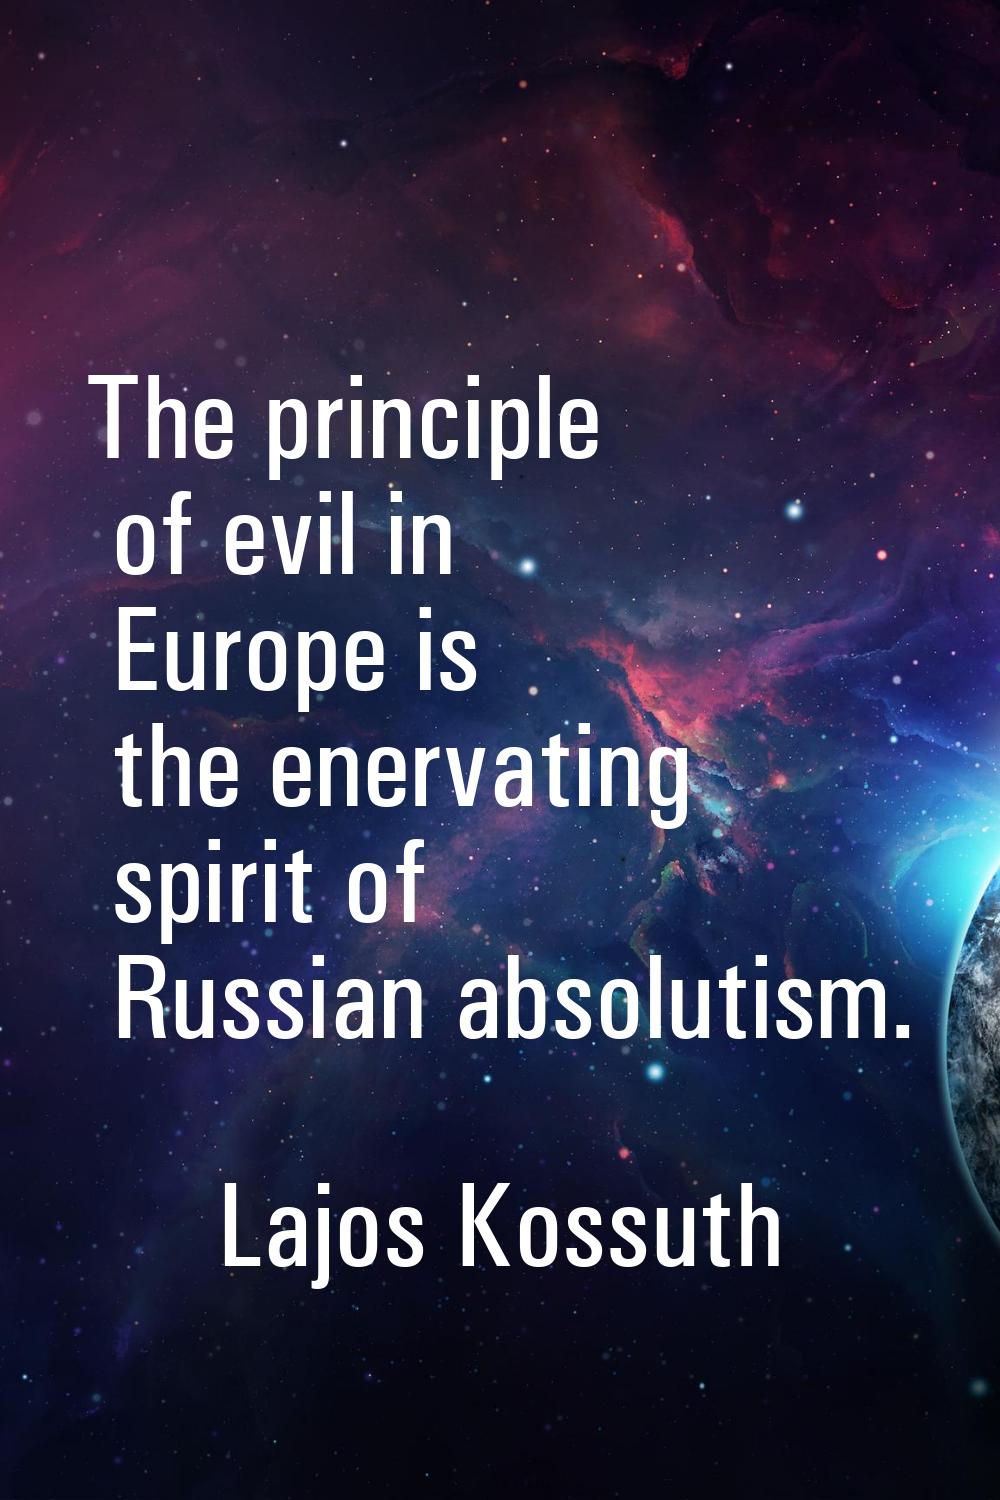 The principle of evil in Europe is the enervating spirit of Russian absolutism.